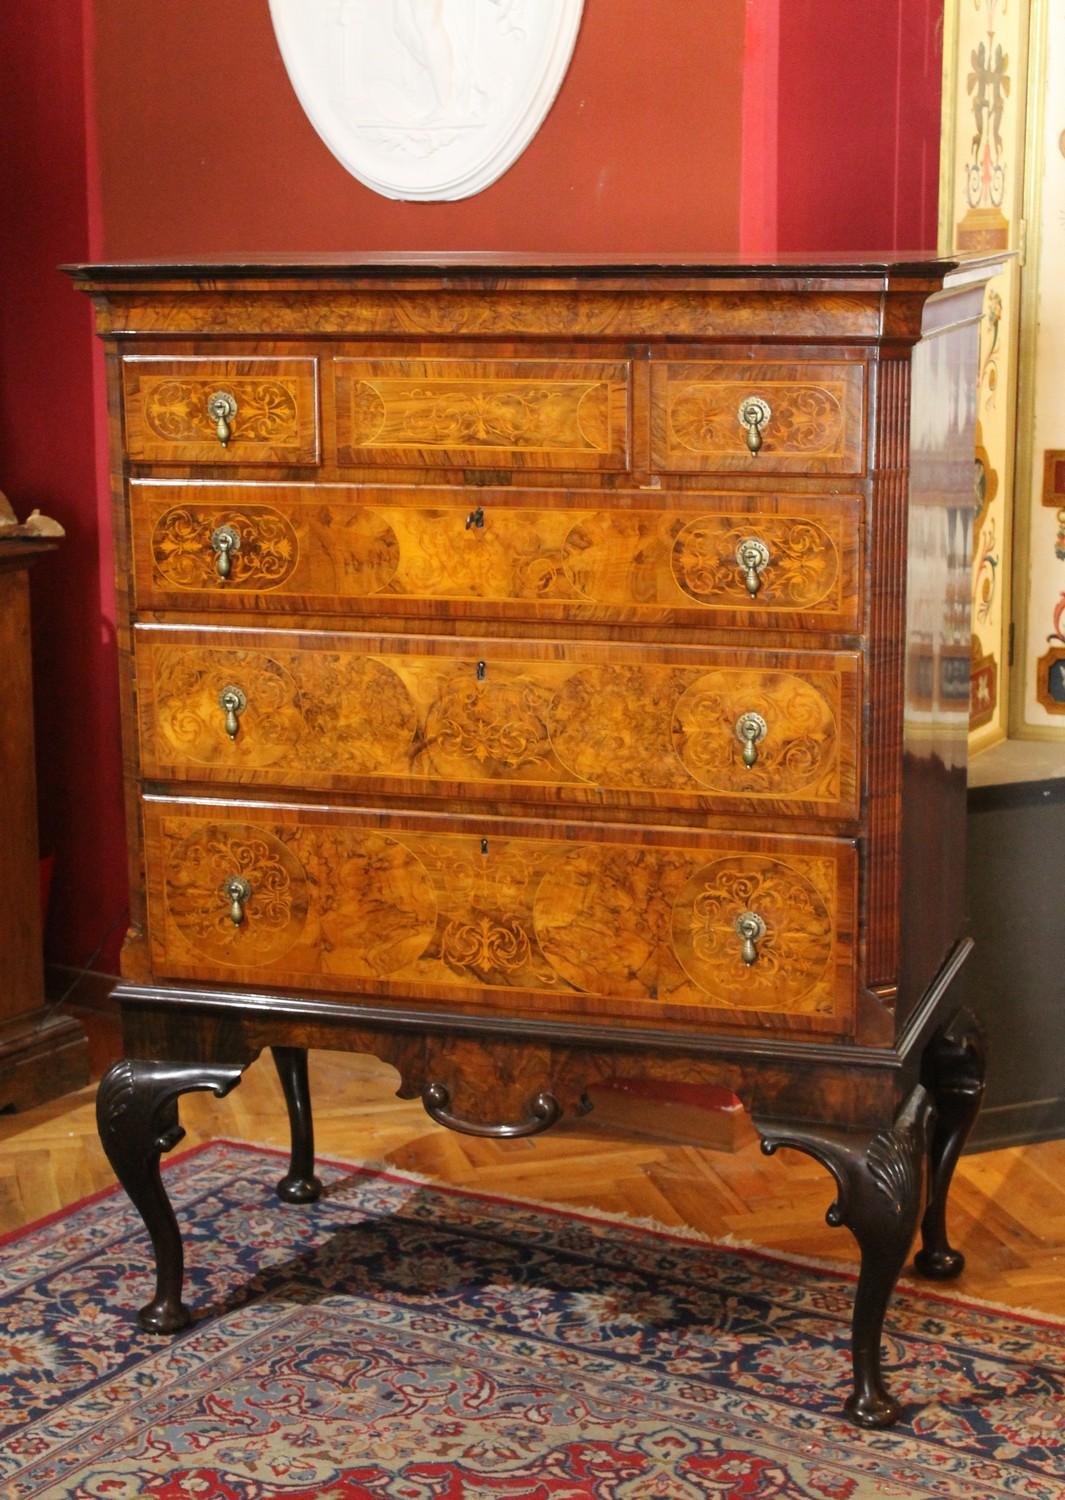 This very fine English late 19th-early 20th century (probably Victoria or Edward VII period) Georgian style chest on stand or highboy is made of the most finest burl walnut featuring an exceptional veneered wood and warm grain.
The cabinet has both